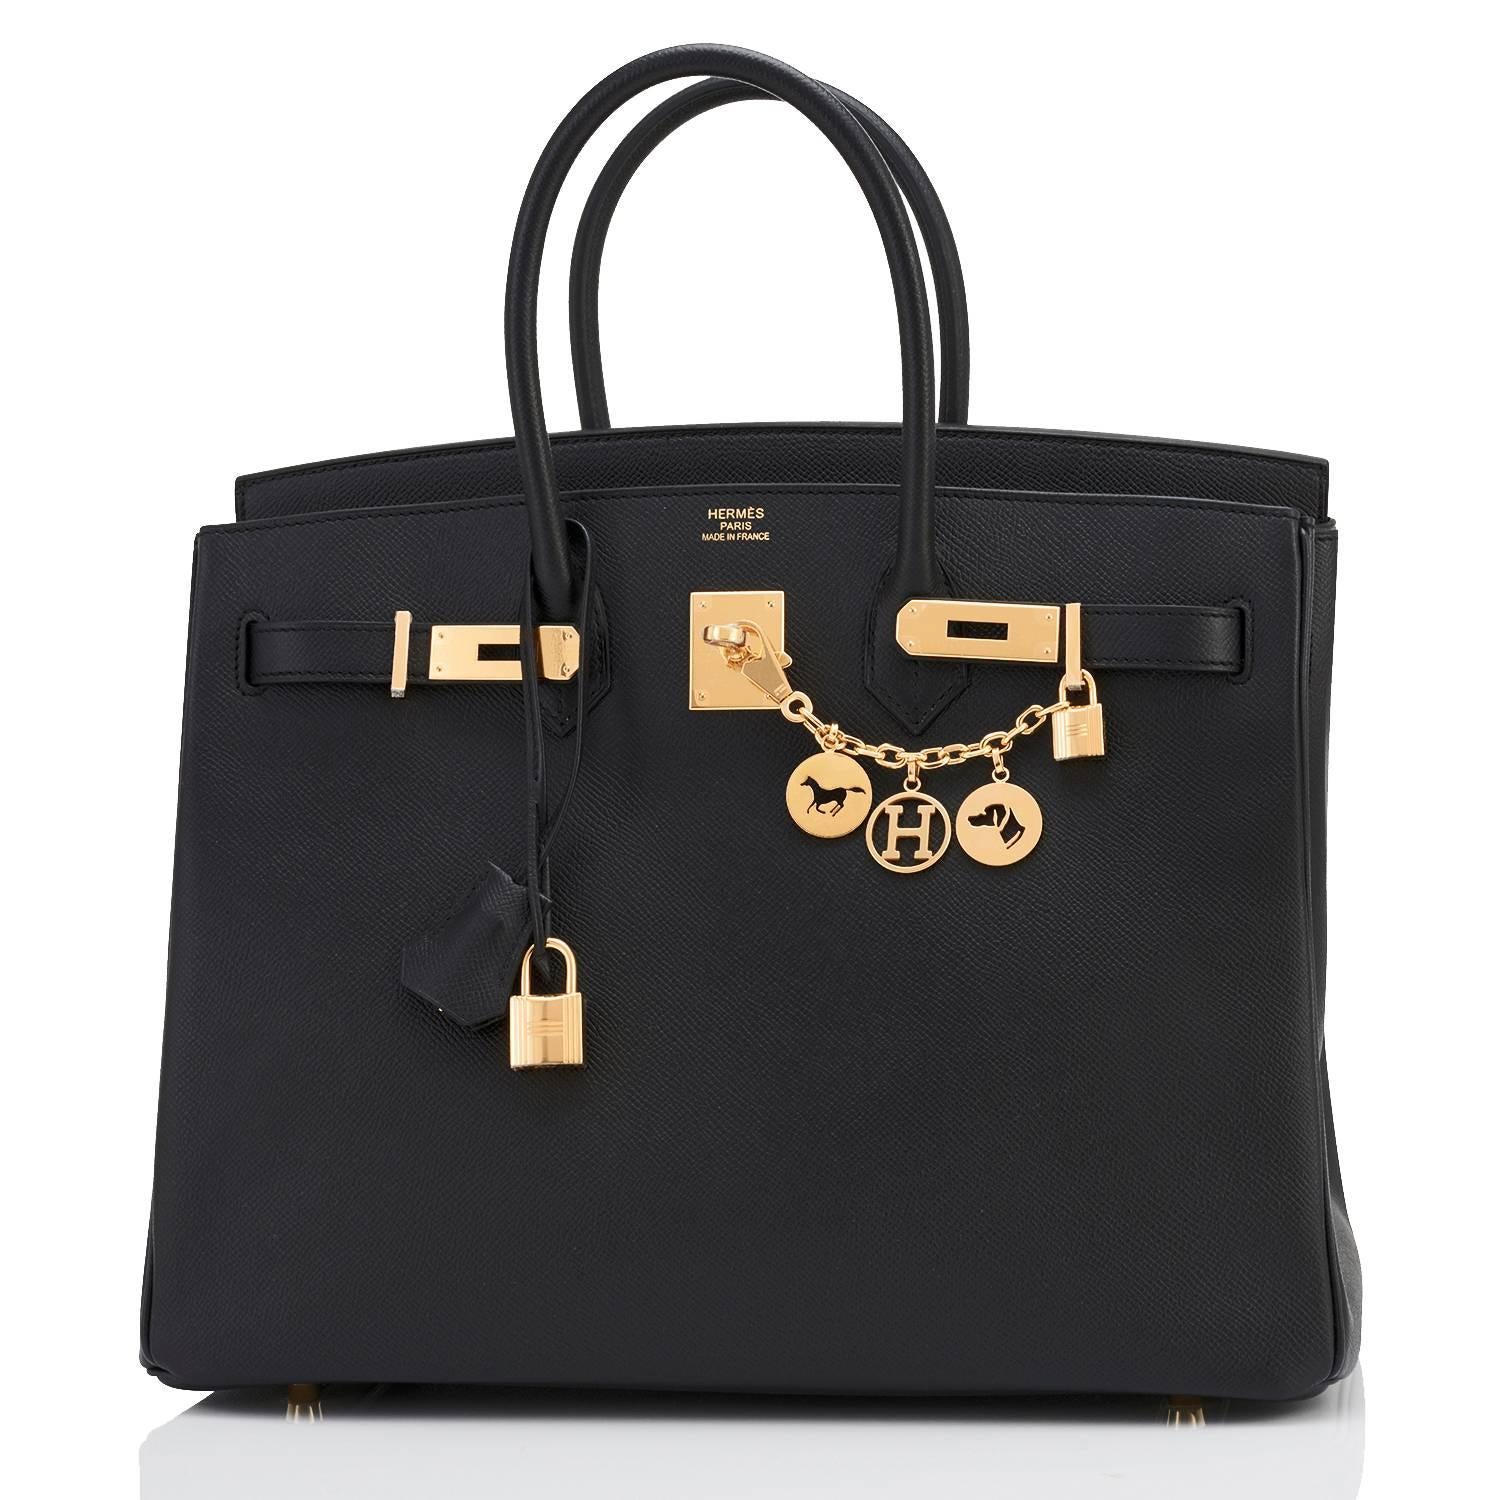 Hermes Black 35cm Birkin Gold Hardware Epsom Bag Power Birkin
Brand new in box. Store Fresh.  Pristine condition (with plastic on hardware).
Perfect gift! Comes with keys, lock, clochette, a sleeper for the bag, rain protector, and orange Hermes